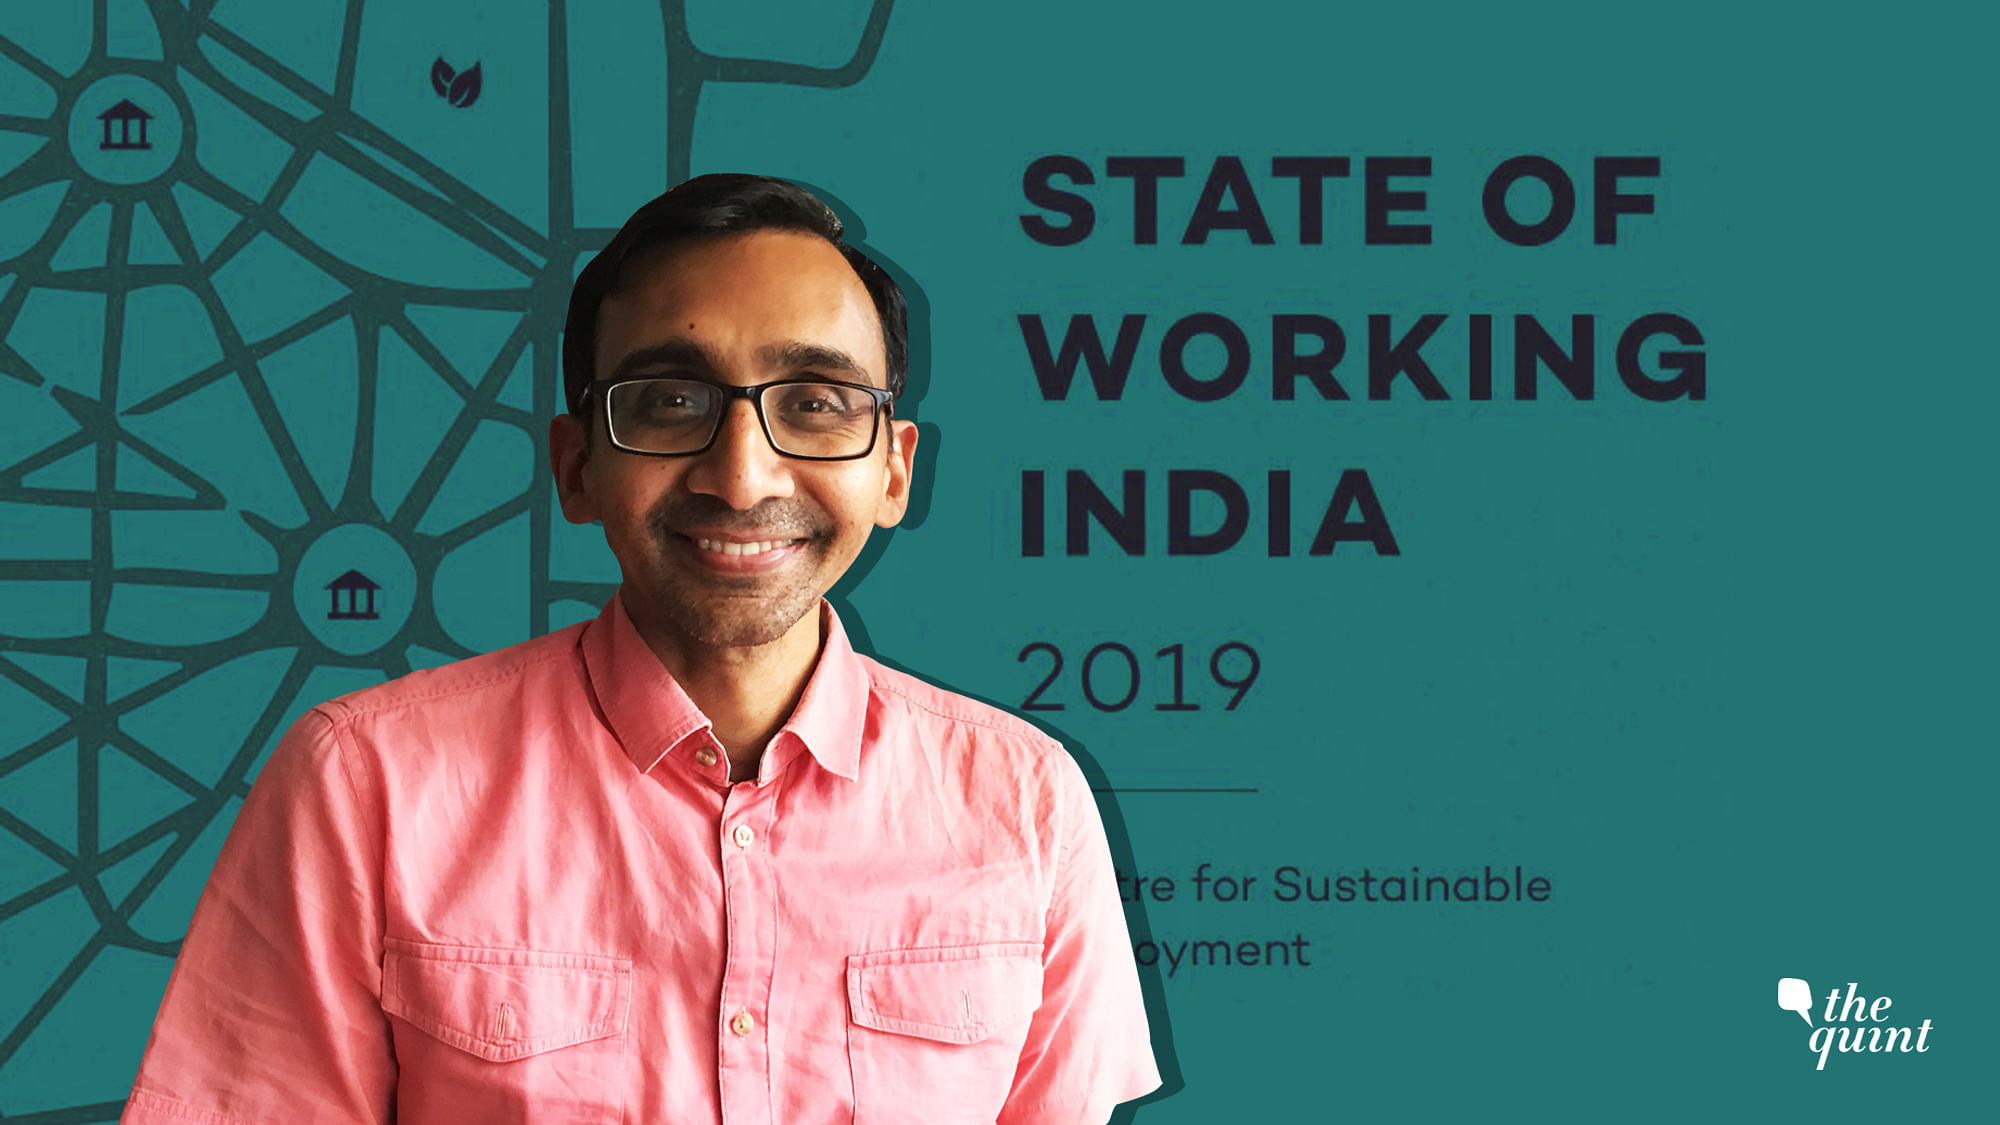 Amit Basole, from the Centre for Sustainable Development at Azim Premji University, was the lead author for the State of Working India Report 2019.